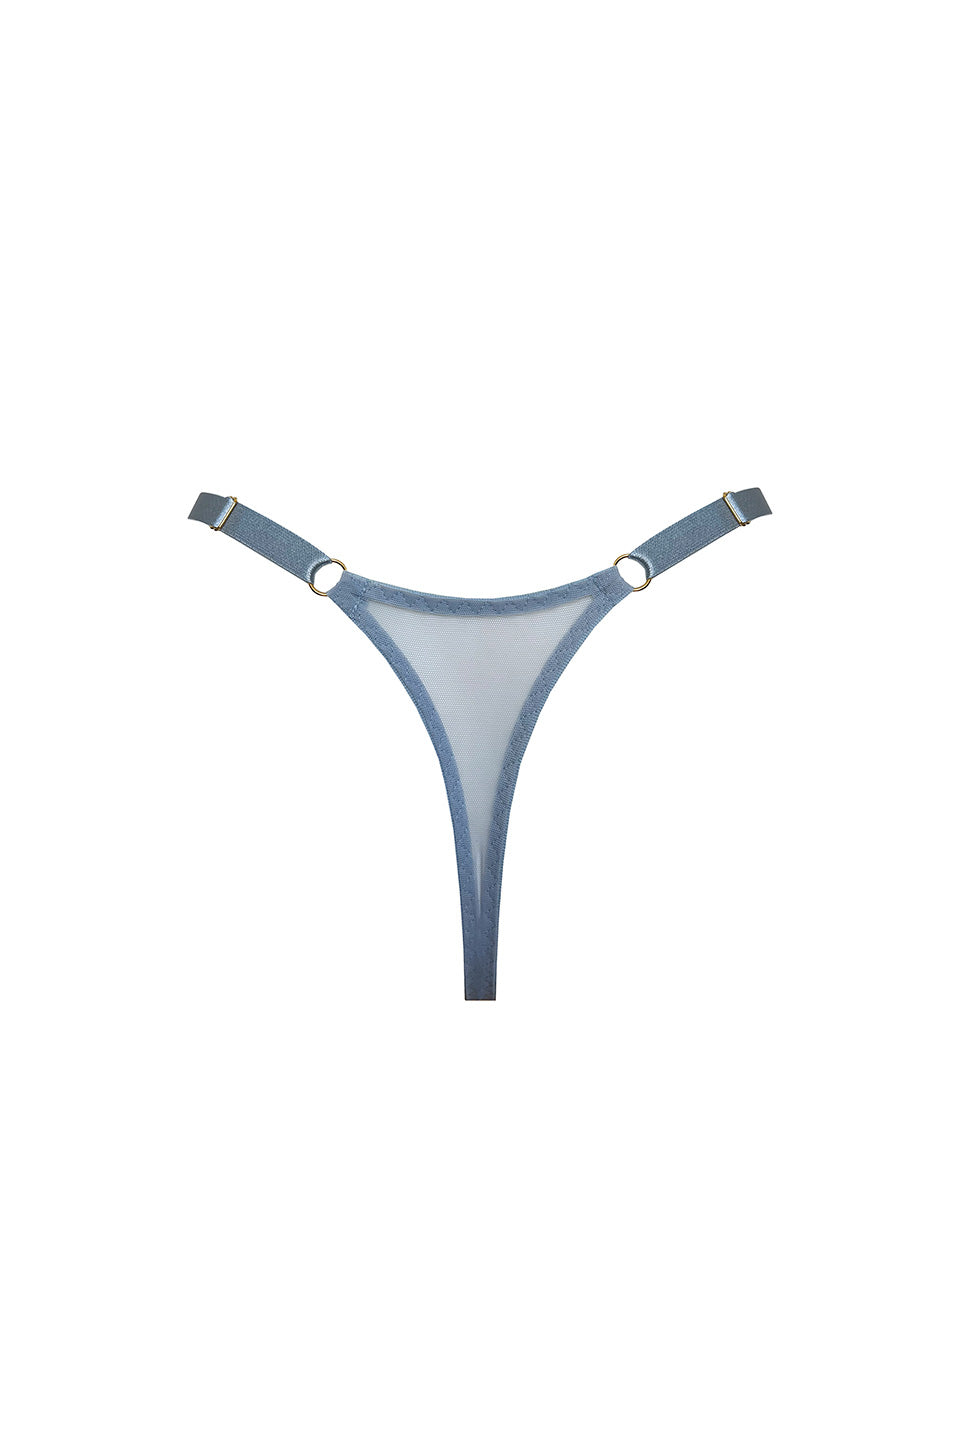 Thumbnail for Product gallery 2, Vero Thong Dusty Blue